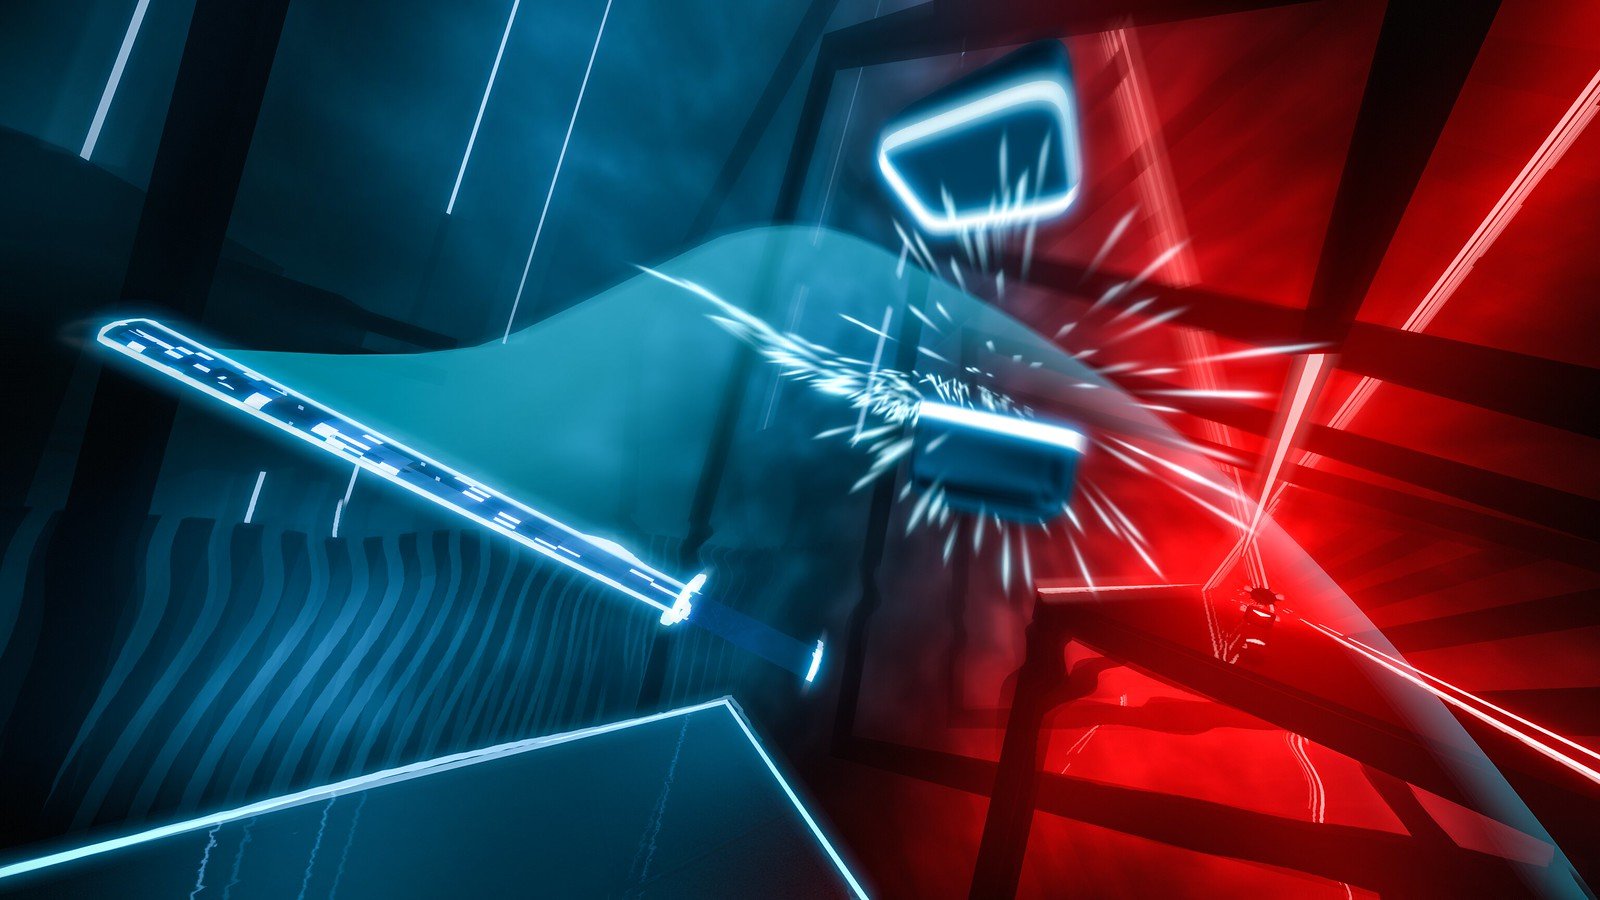 Beat Saber Lands on PS VR November 20 With New Content ...